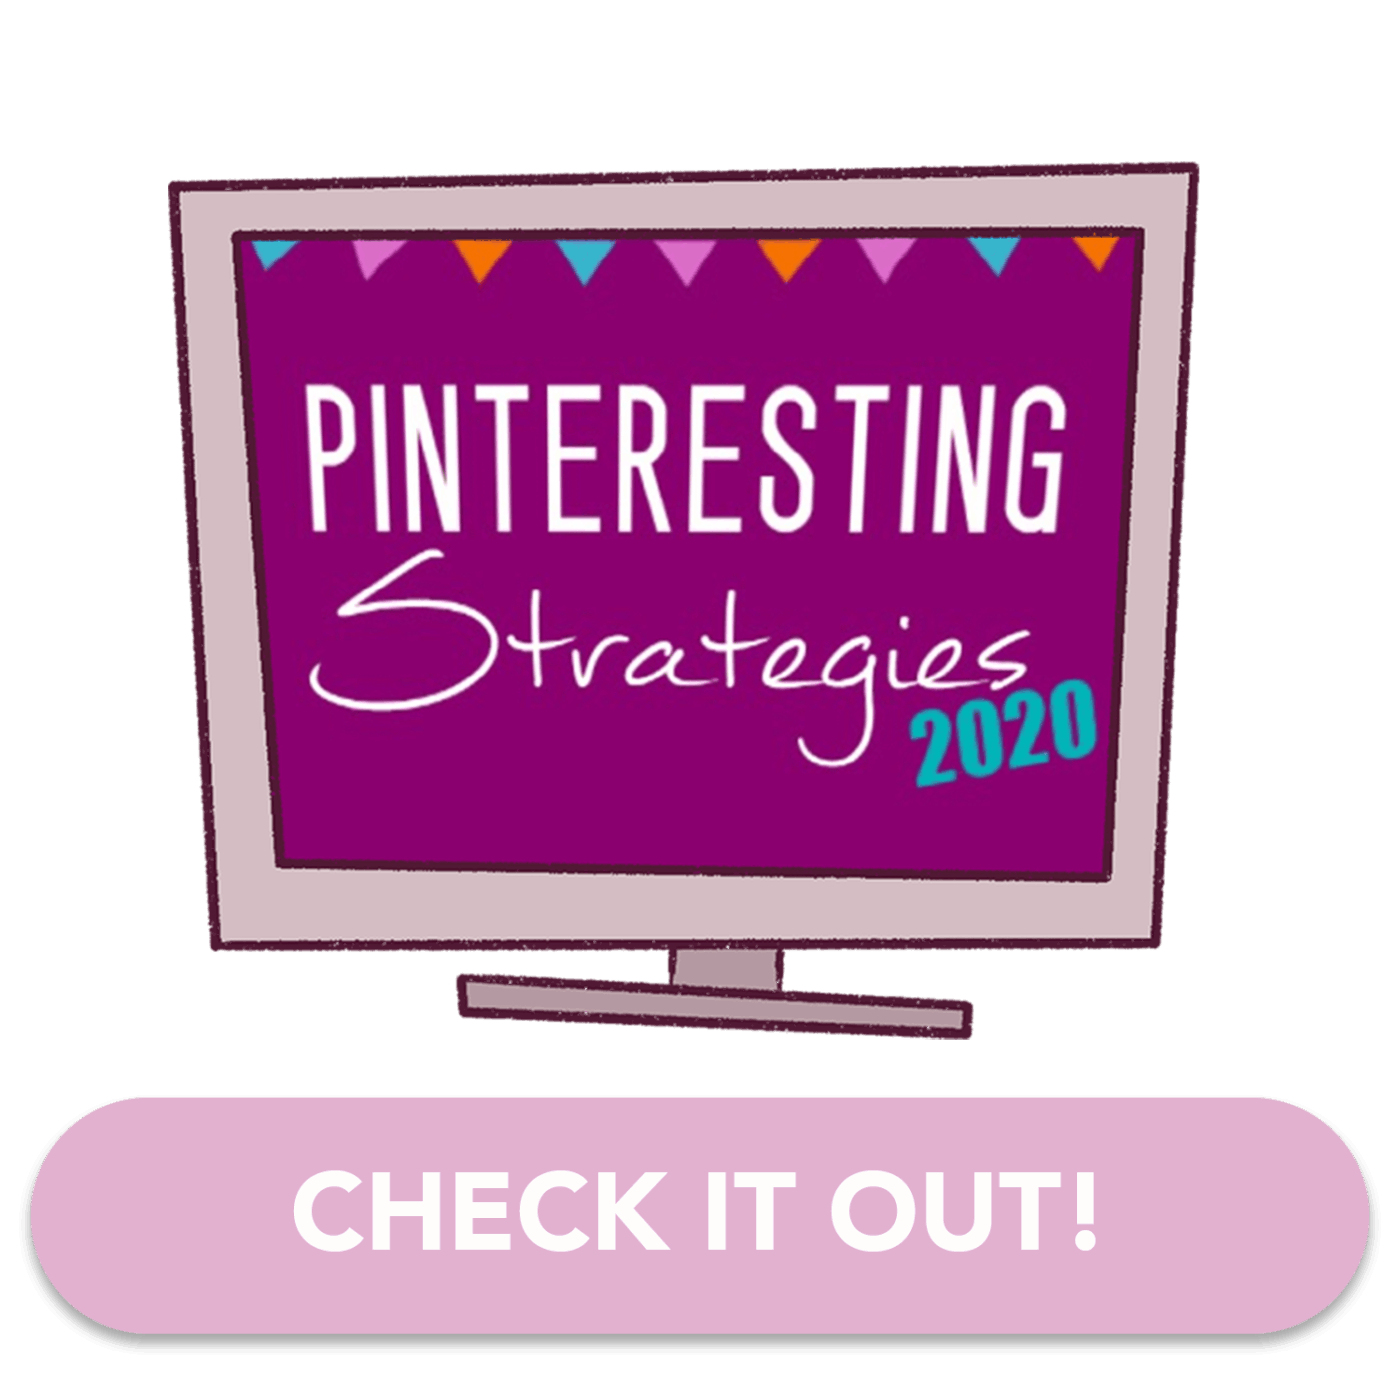 This is officially the best Pinterest course I've taken. I learned how to double my Pinterest views and clicks just by implementing the methods in this course. It uses only manual pinning!